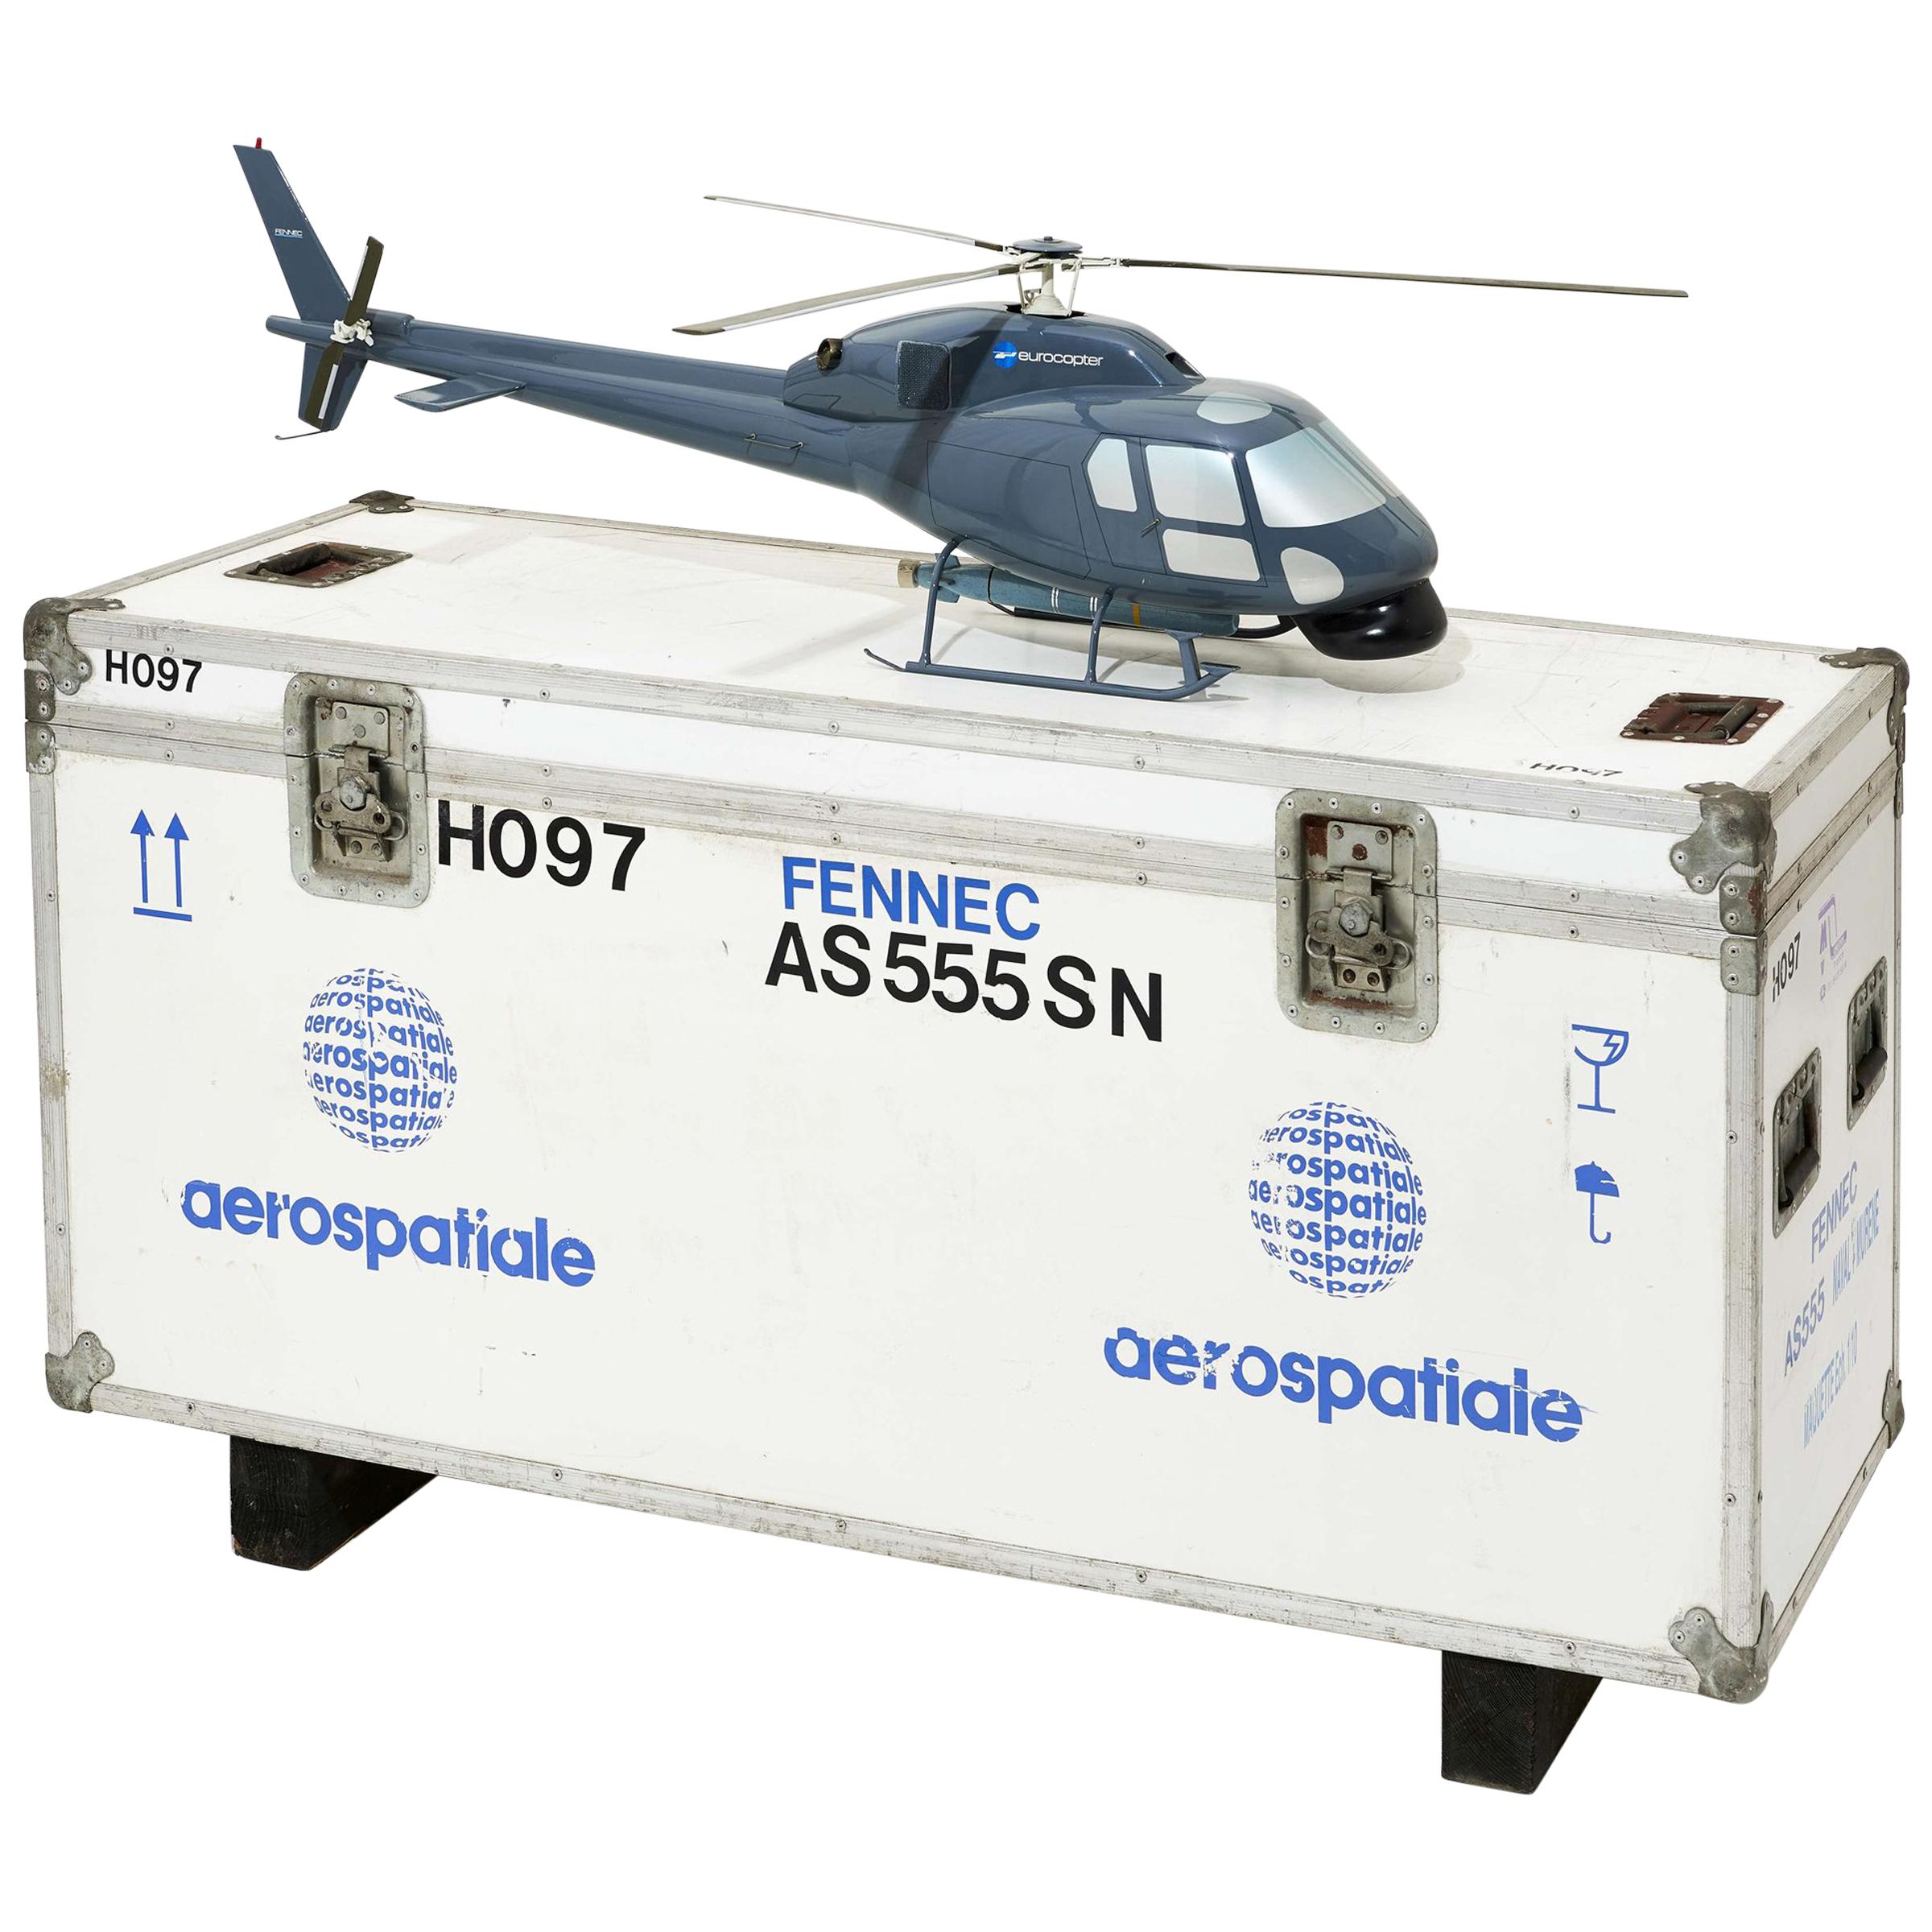 Fennec AS555 Helicopter Model with Transport Box